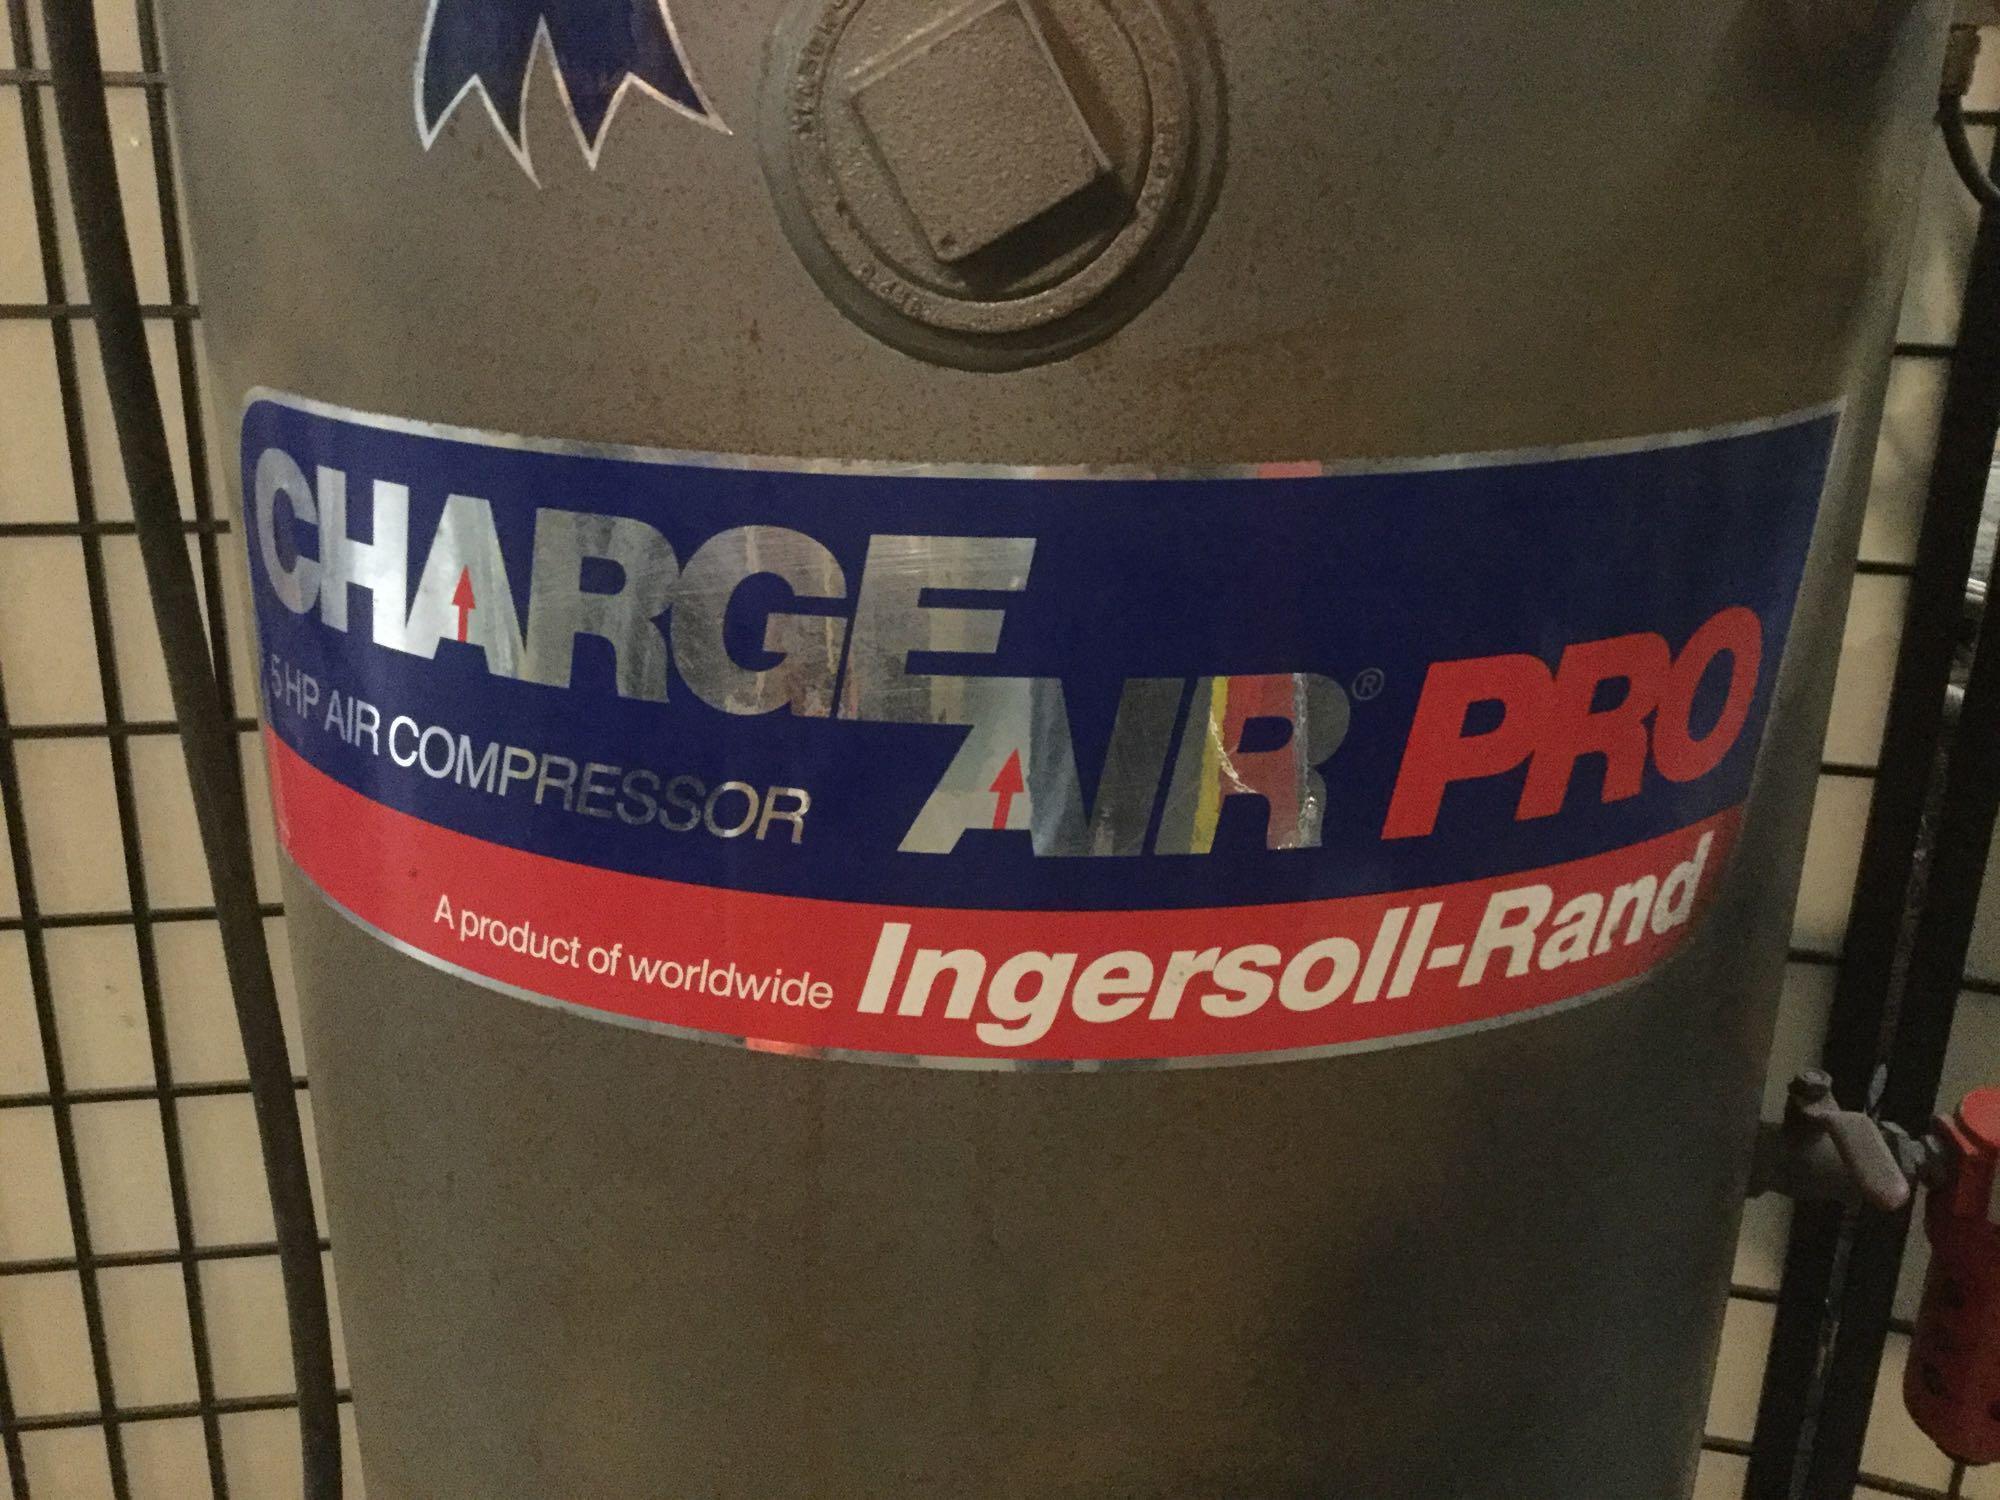 Ingersoll Rand Charge Air Pro 5 HP air compressor - tested and working.